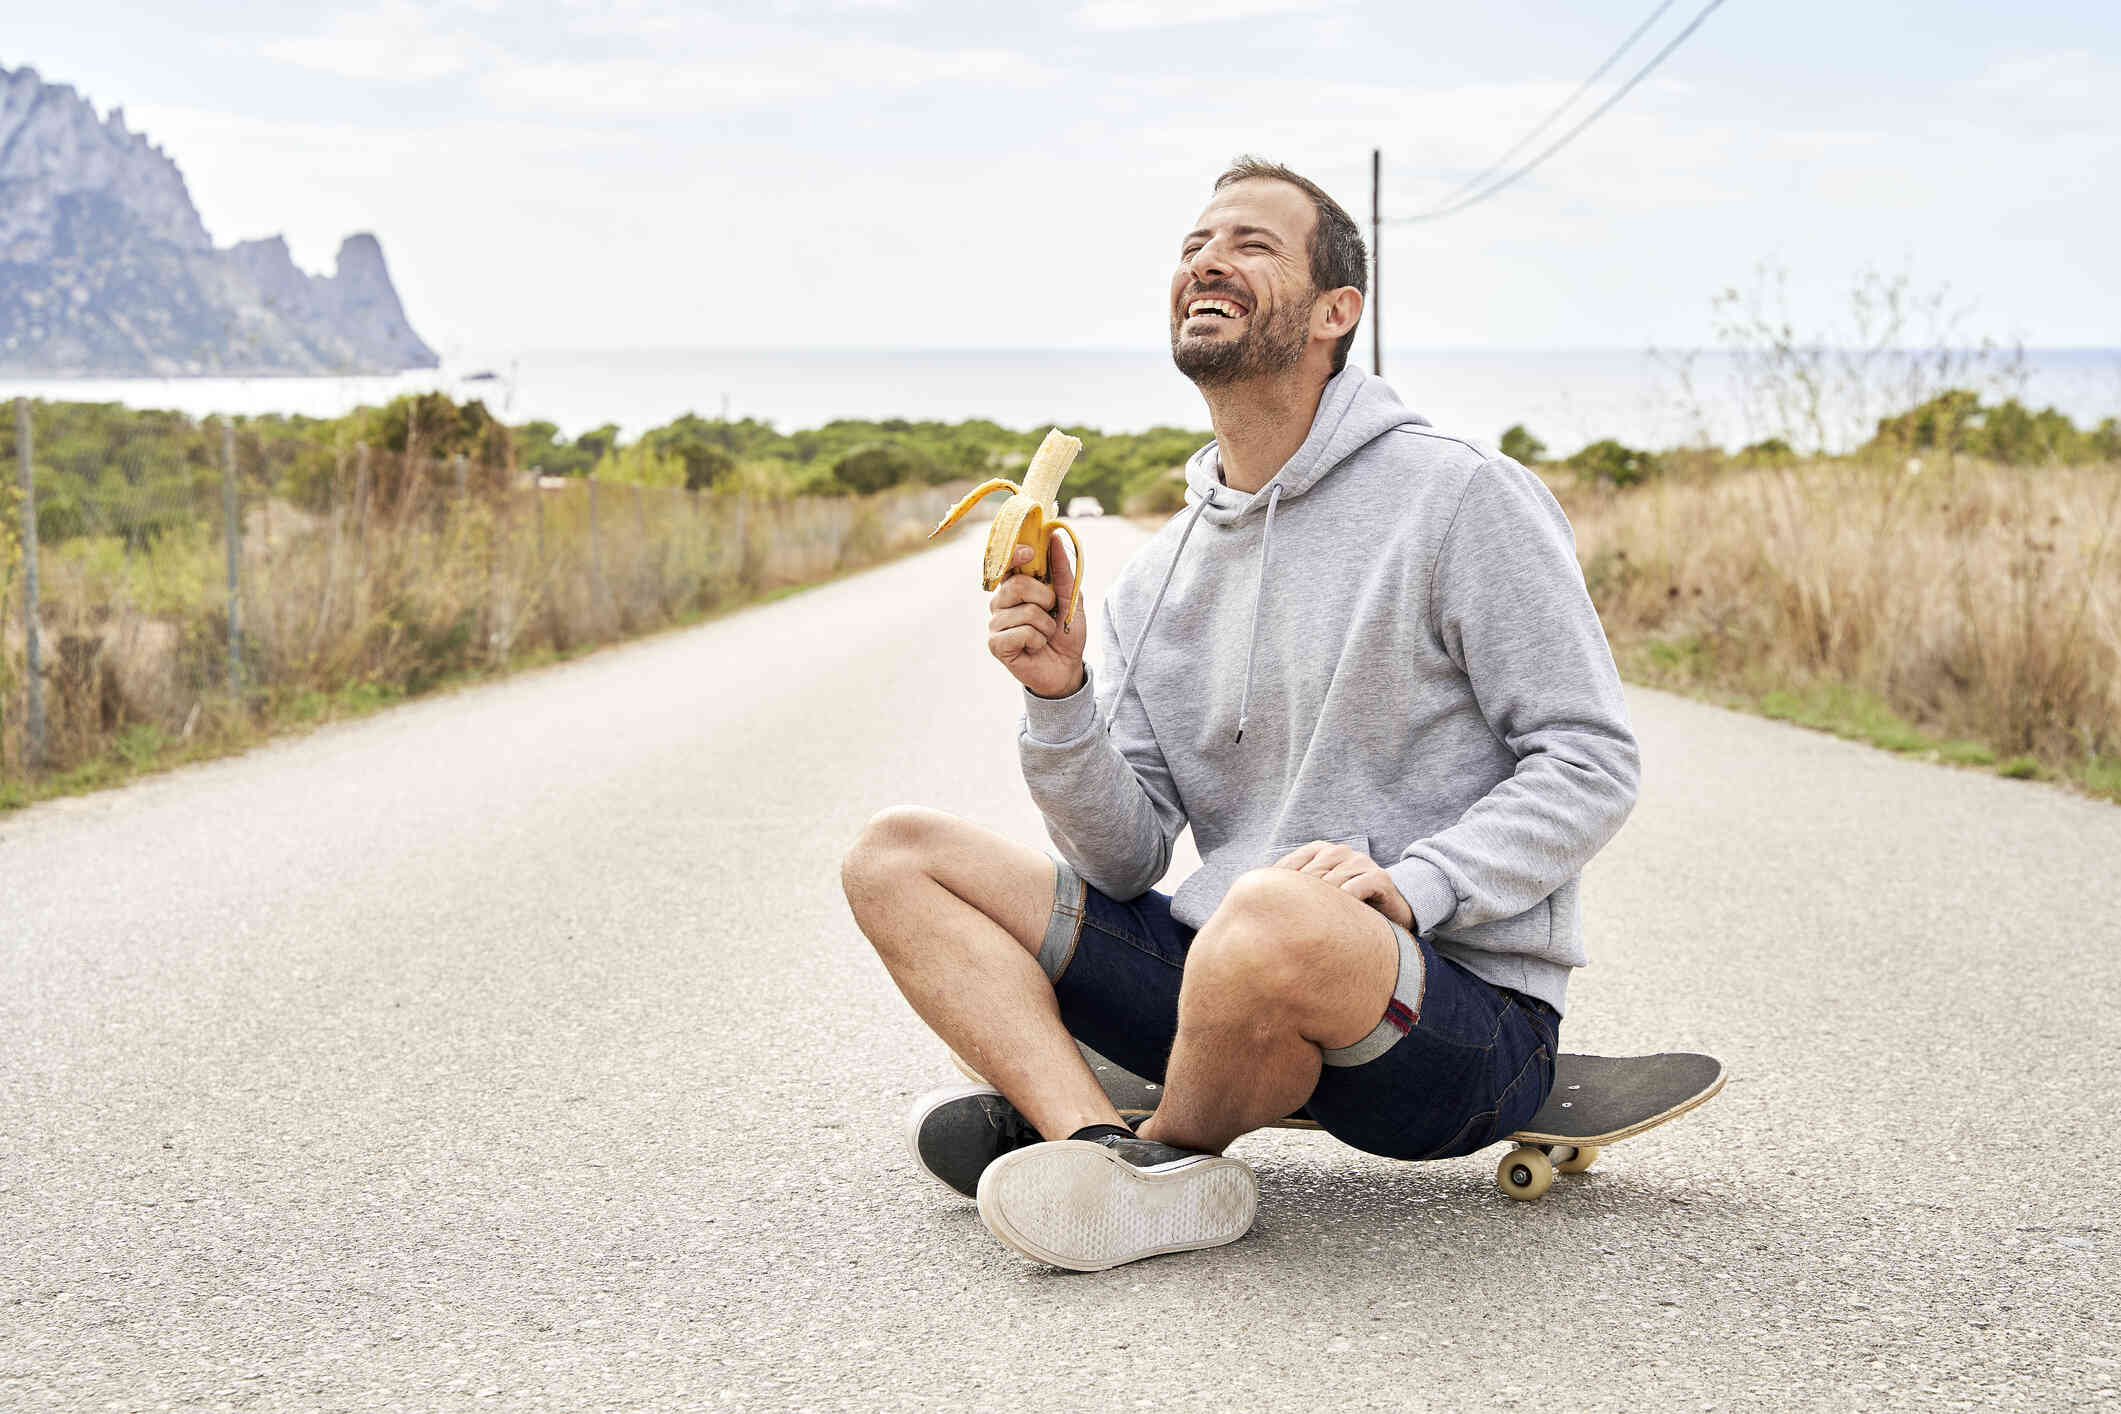 A middle aged man in a grey sweater sits on a skaptboard while holding a half eaten banana and smiling while looking off.